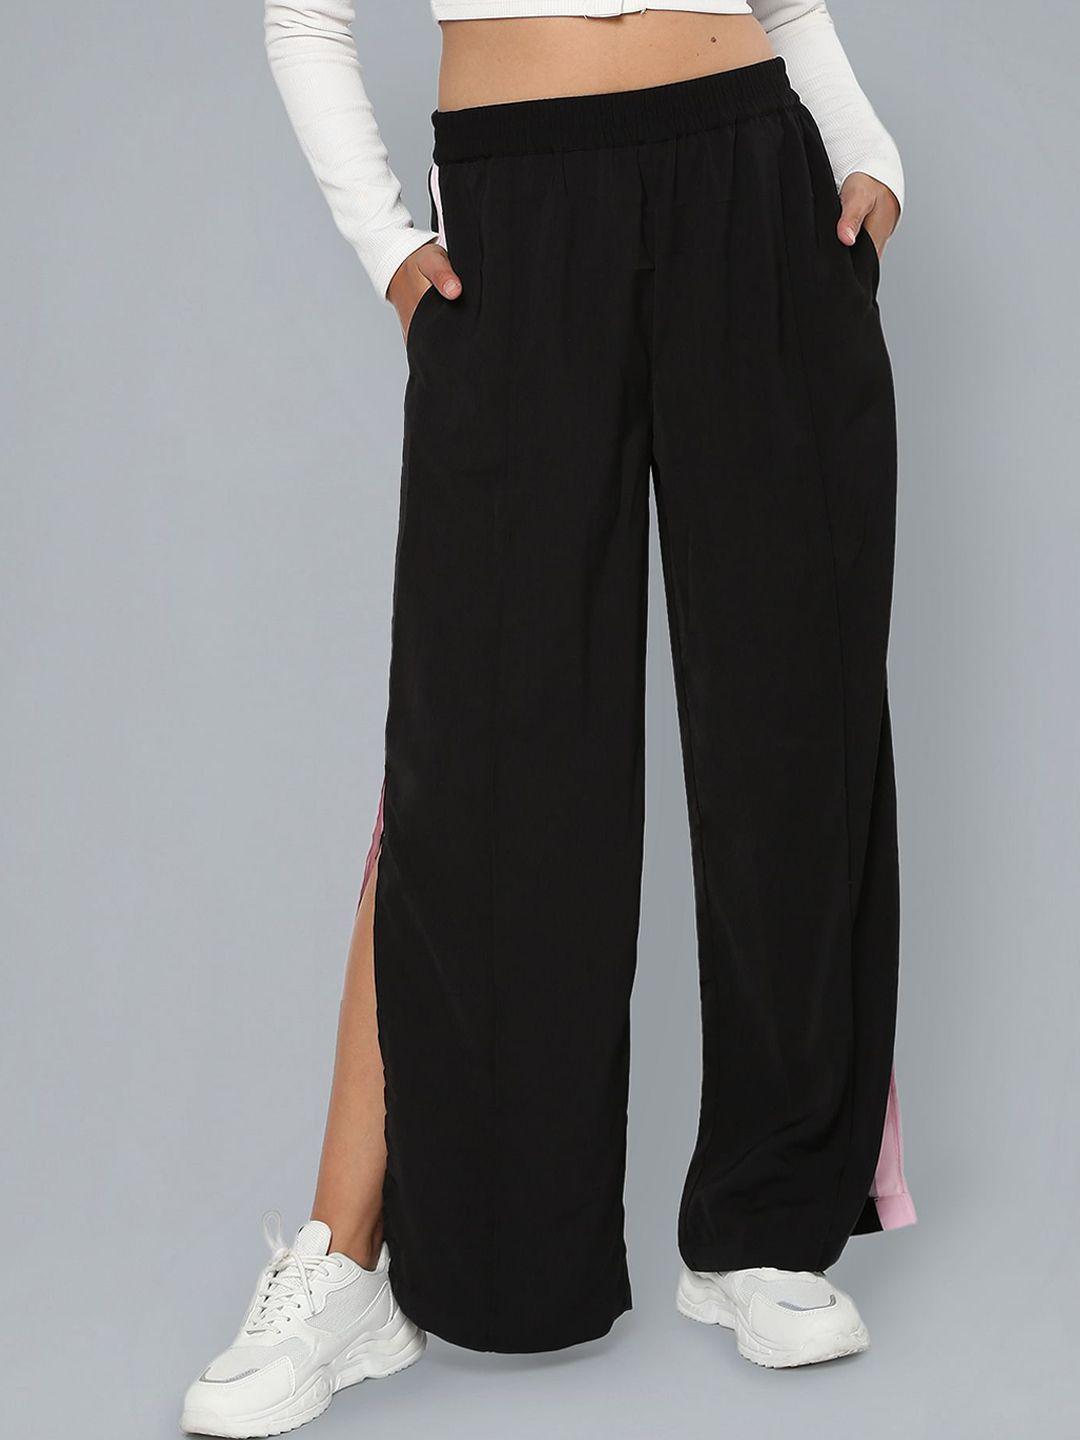 flying-machine-women-contrast-panel-vented-mid-rise-slip-on-parallel-trousers